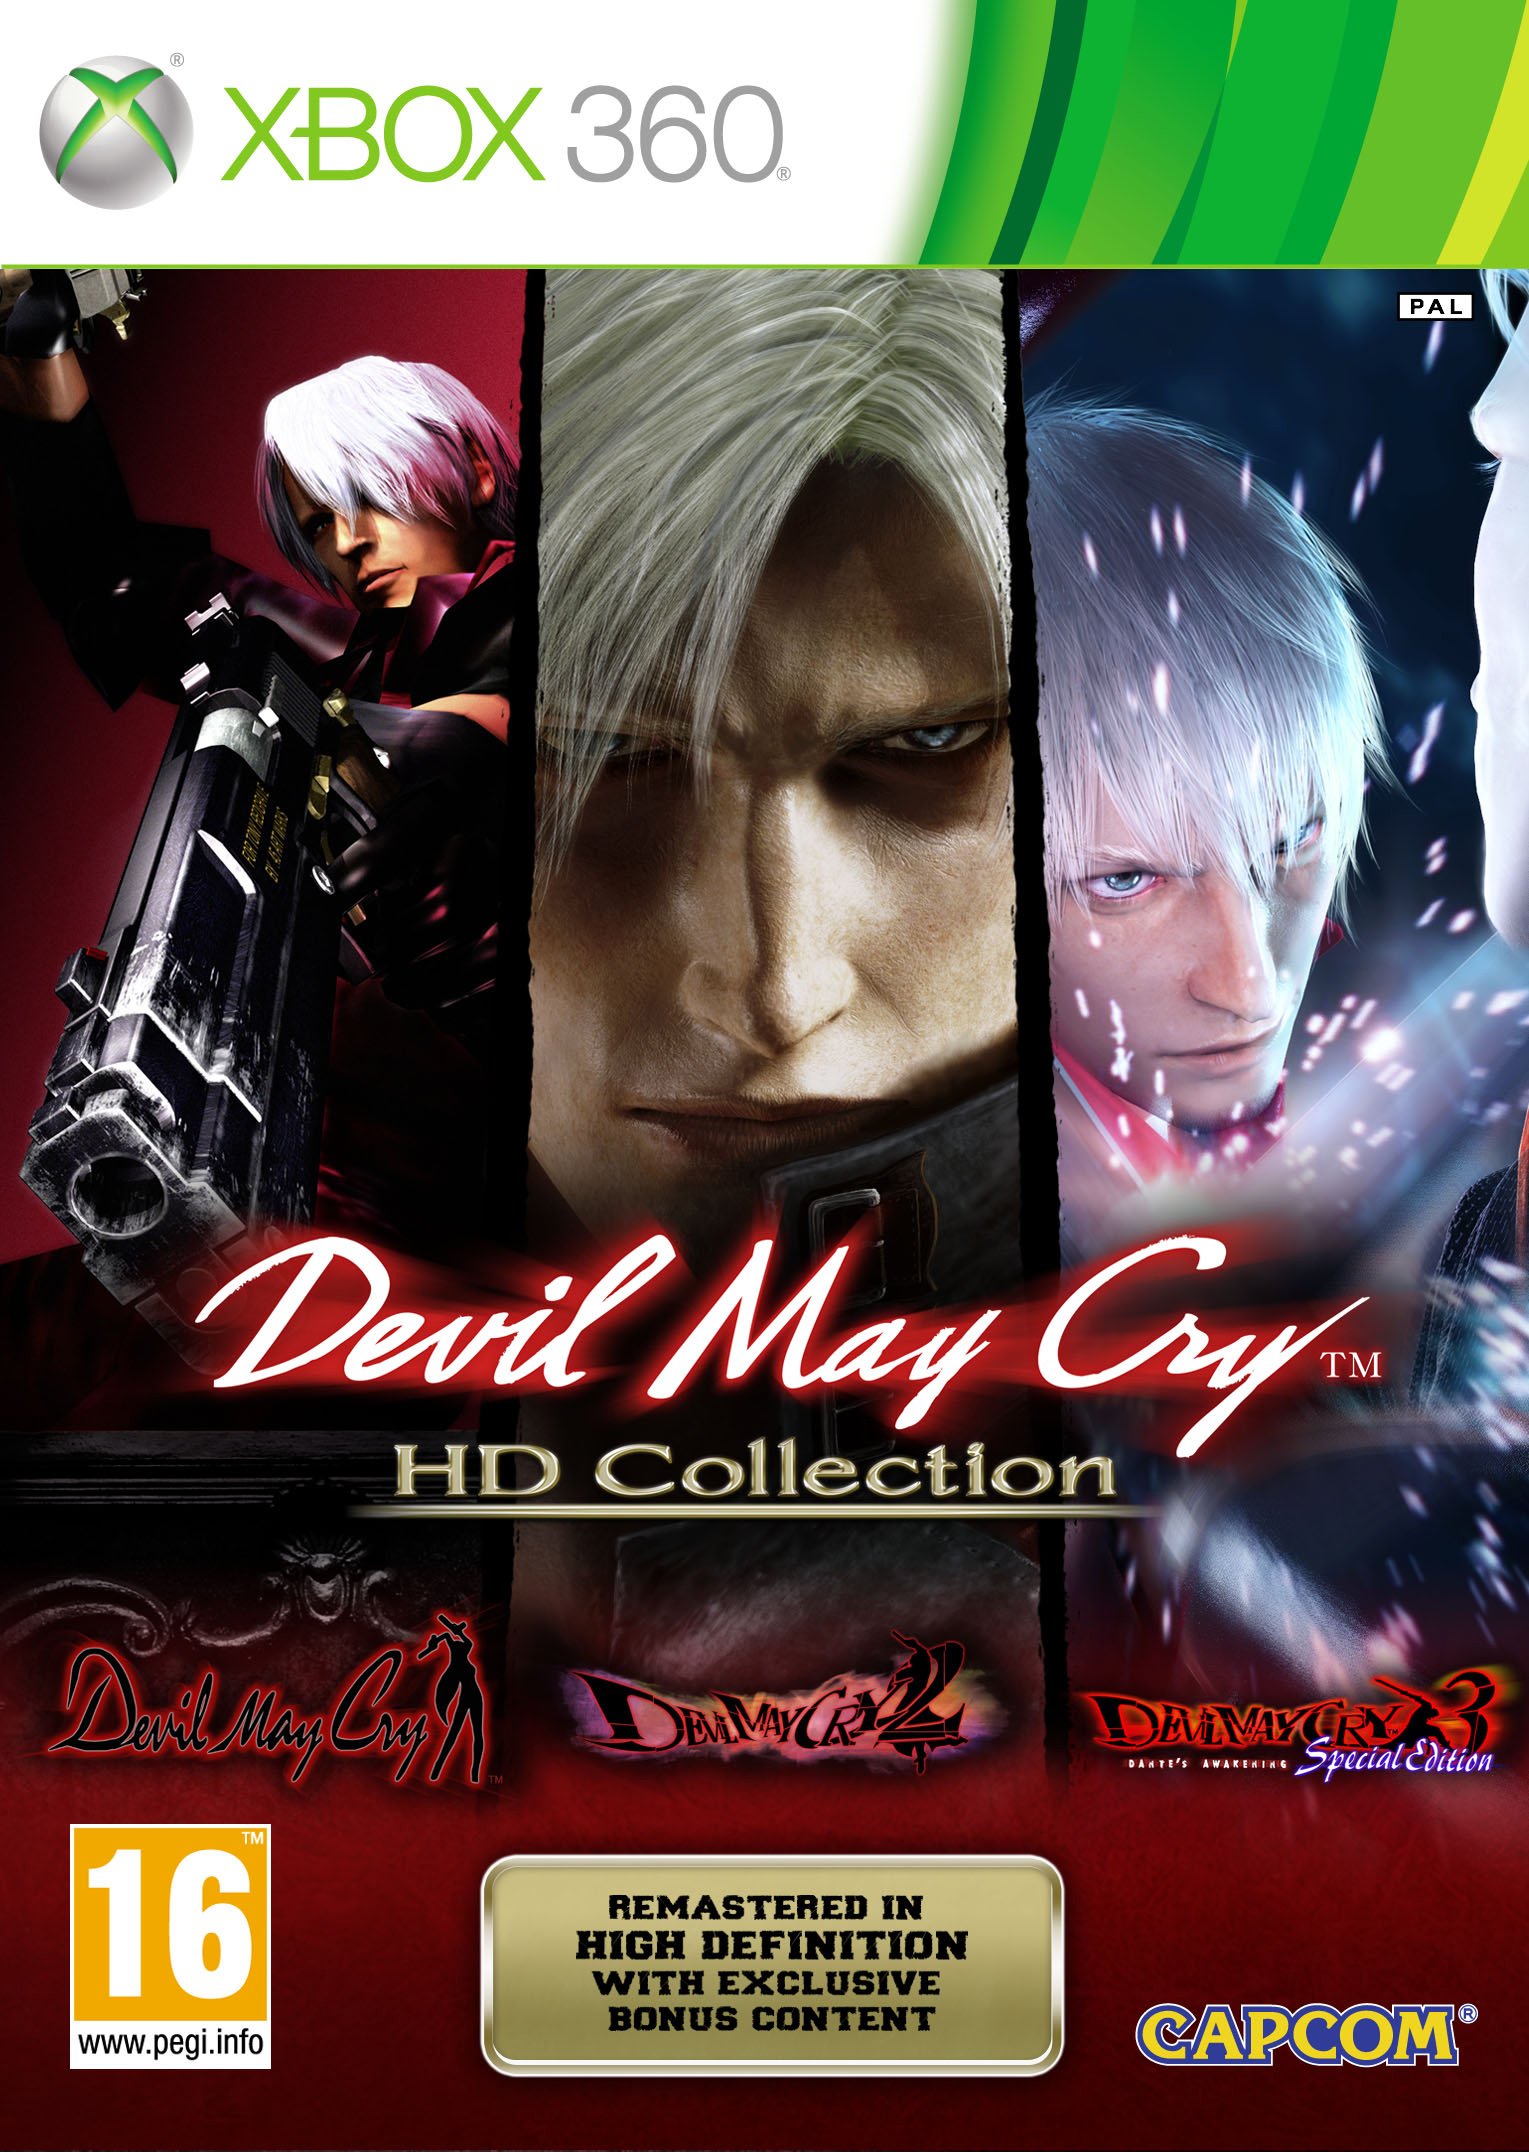 Devil May Cry Hd Collection Xbox Reviews